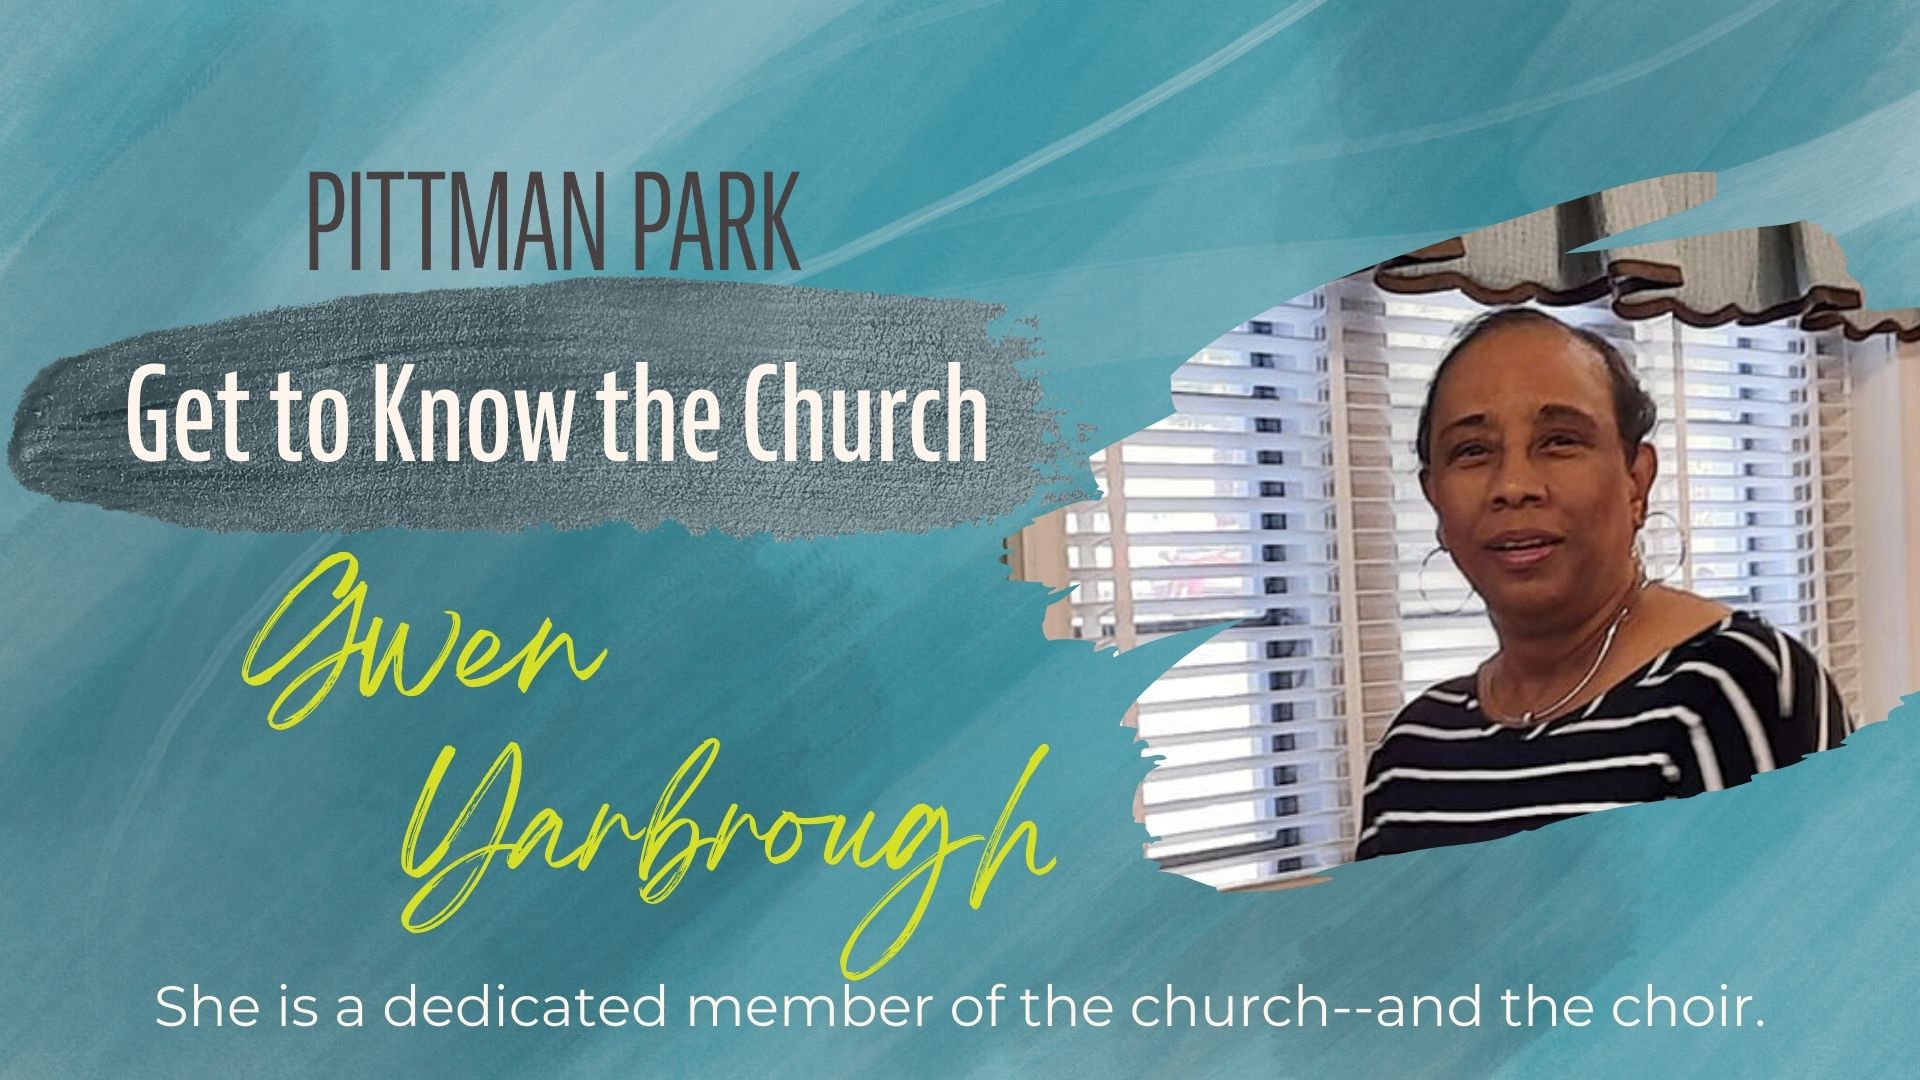 Get to Know the Church: Gwen Yarbrough